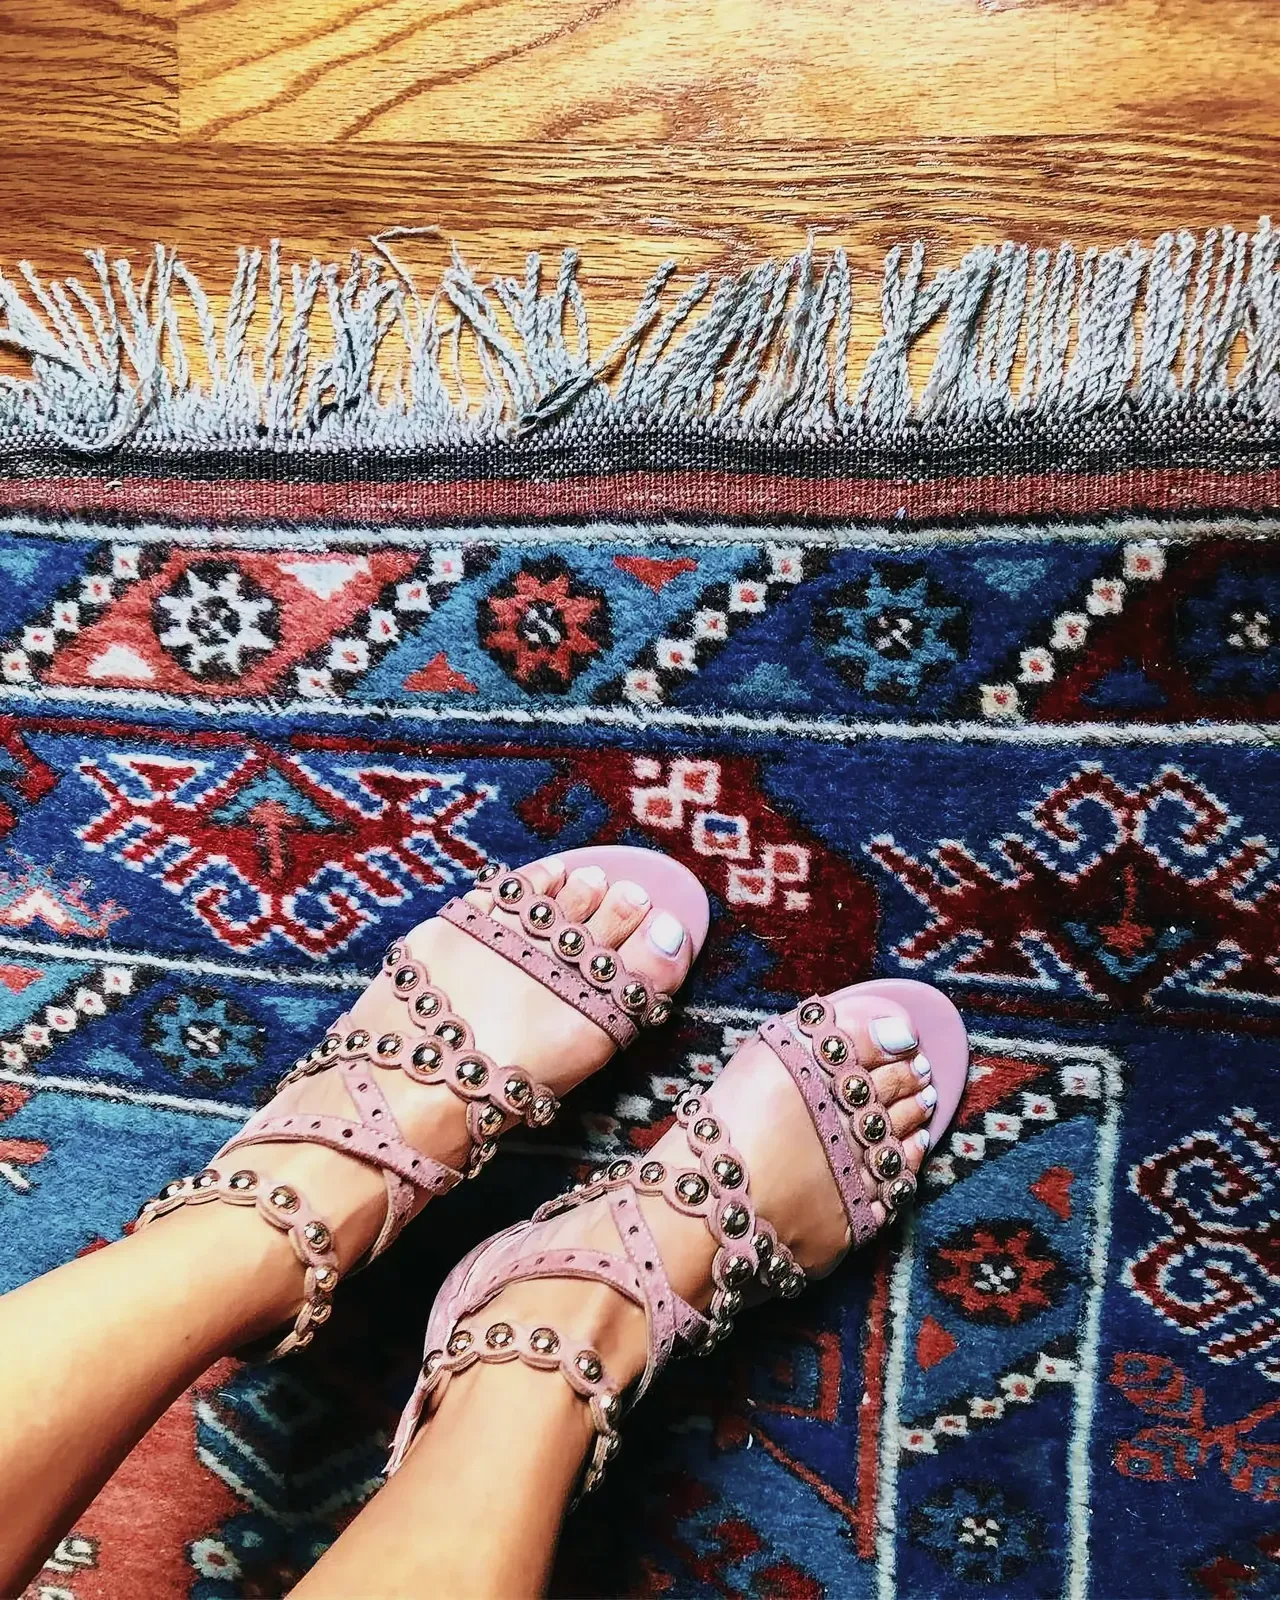 Close-up view of Sam Edelman leather sandals on an artful rug with a fringe.